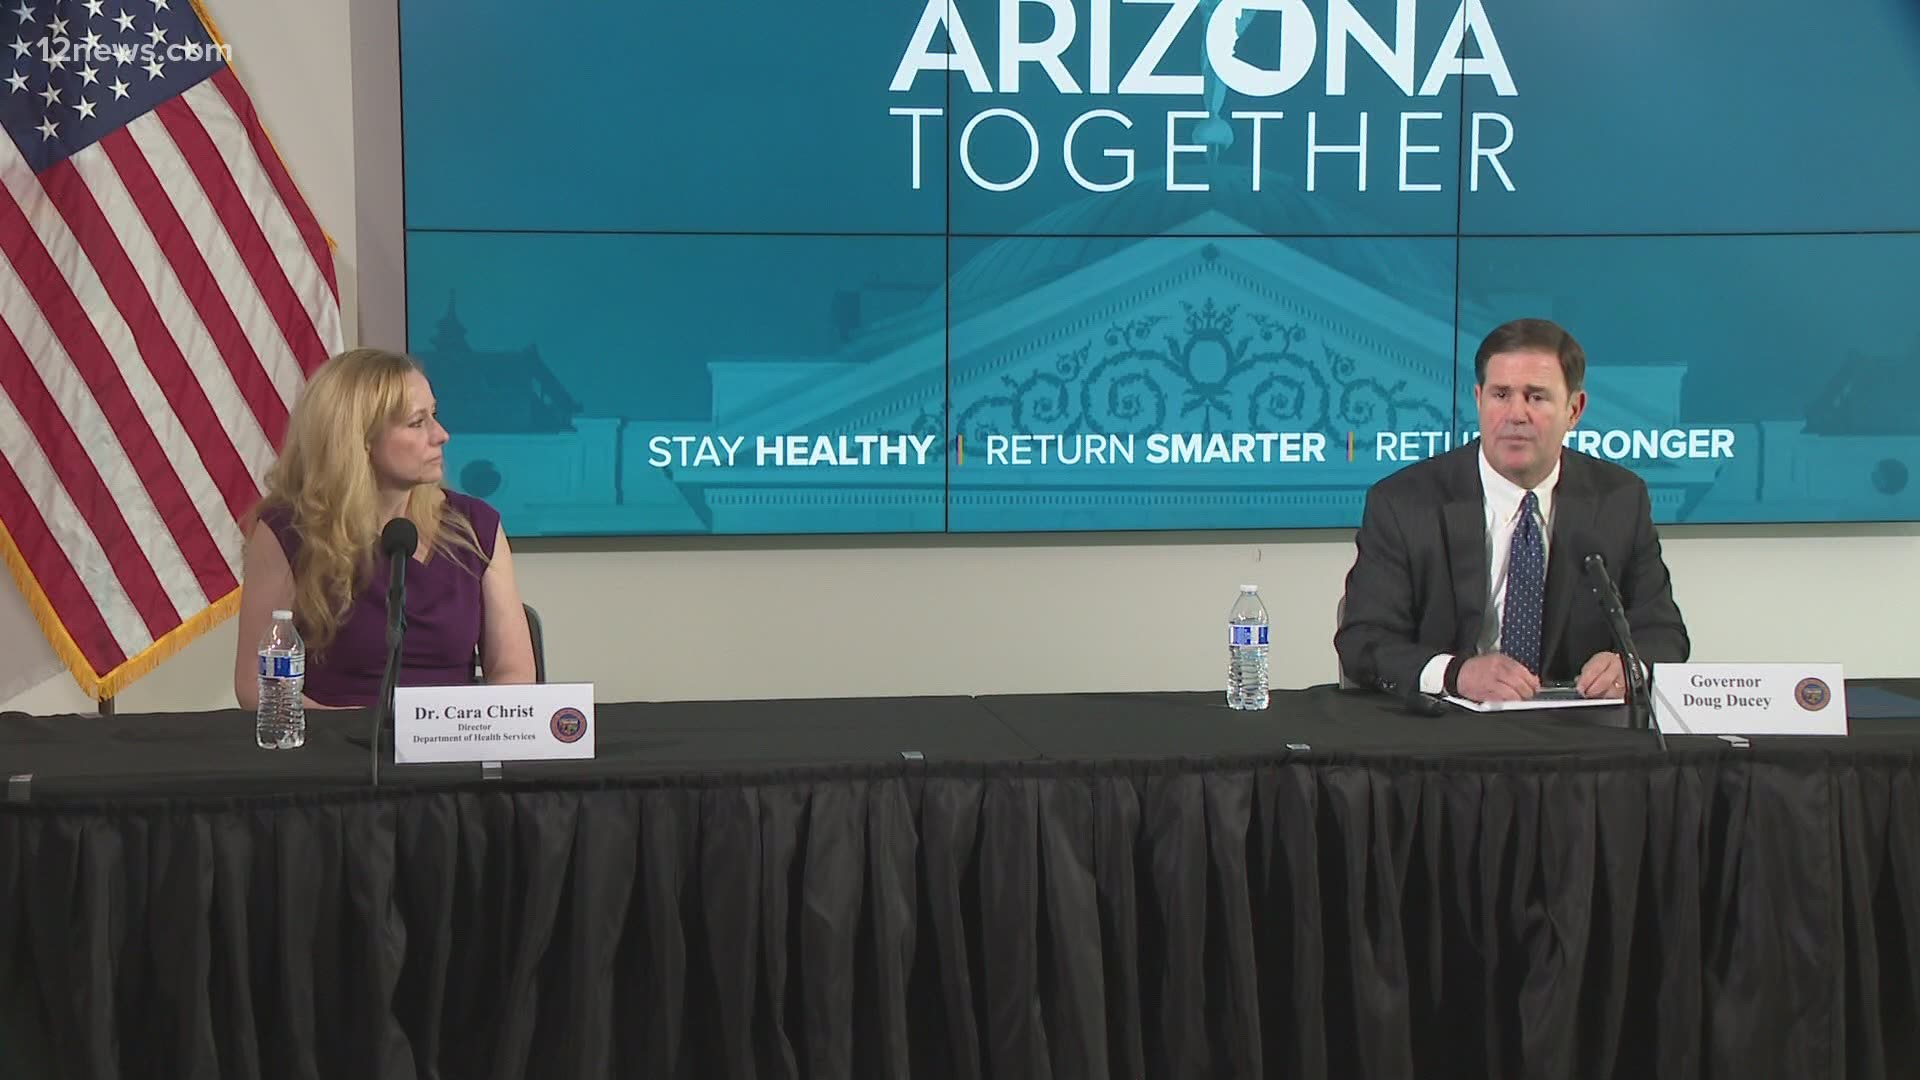 Governor Ducey says Arizona is ready to reopen under White House criteria. But the number of coronavirus cases continues to go up.